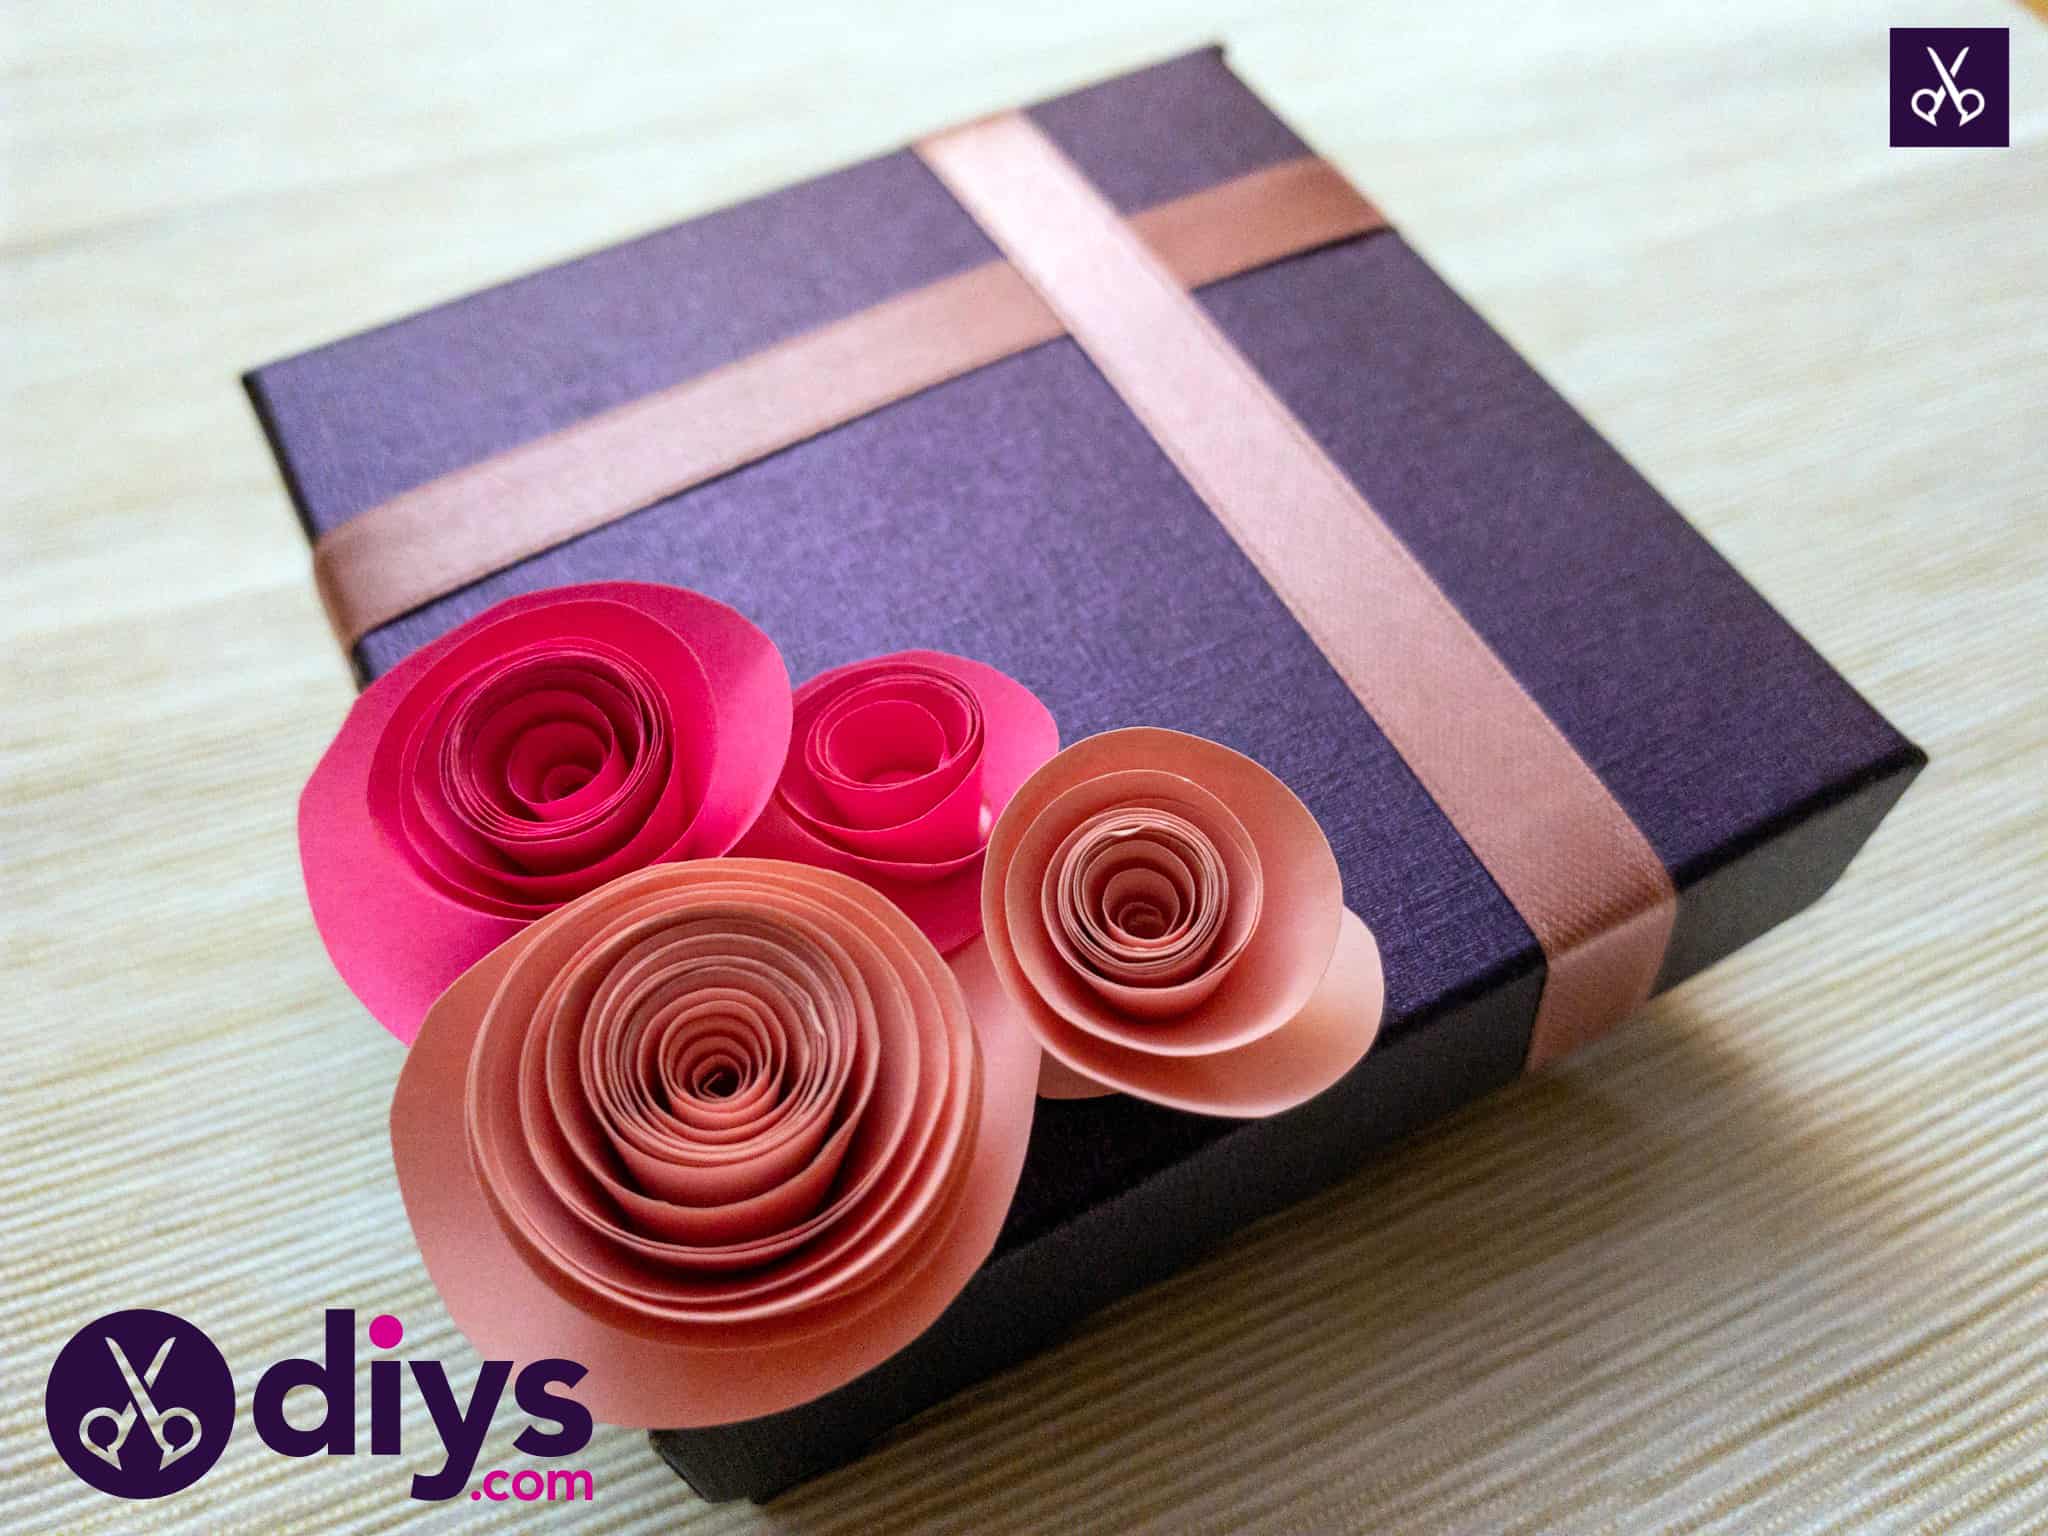 How to make a decorated gift box diy